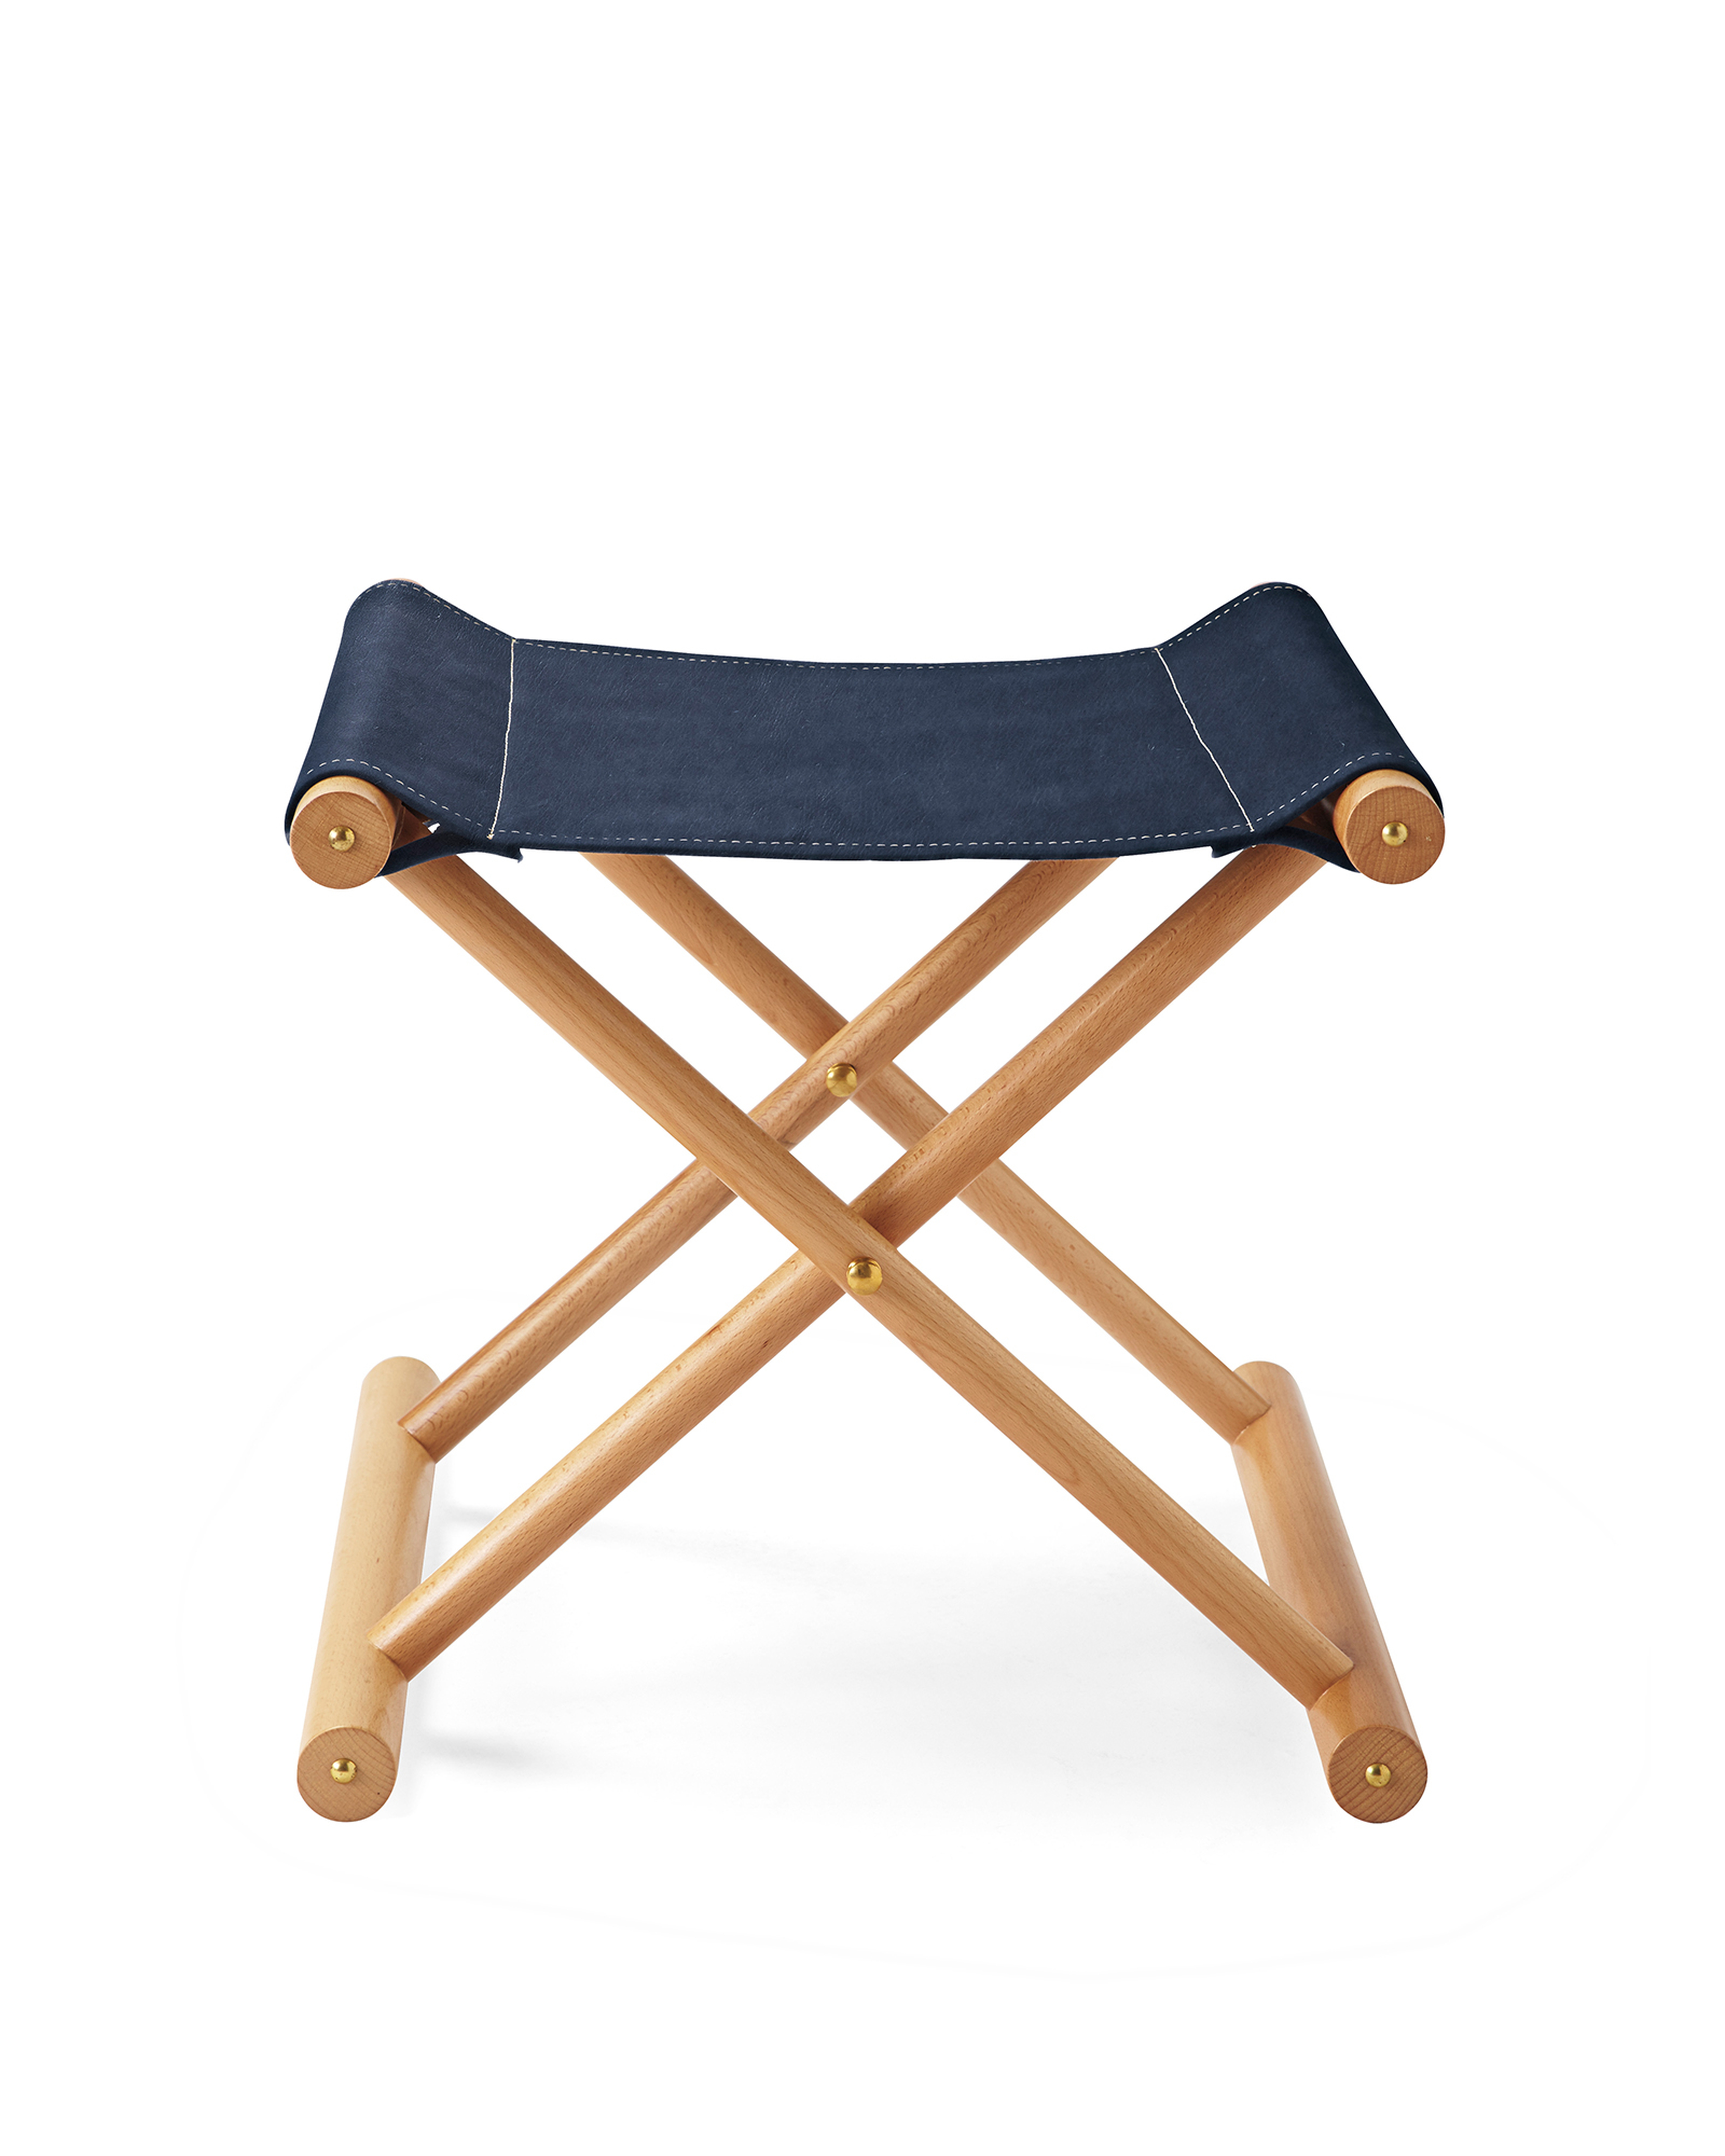 Cooper Leather Stool - Navy - Serena and Lily